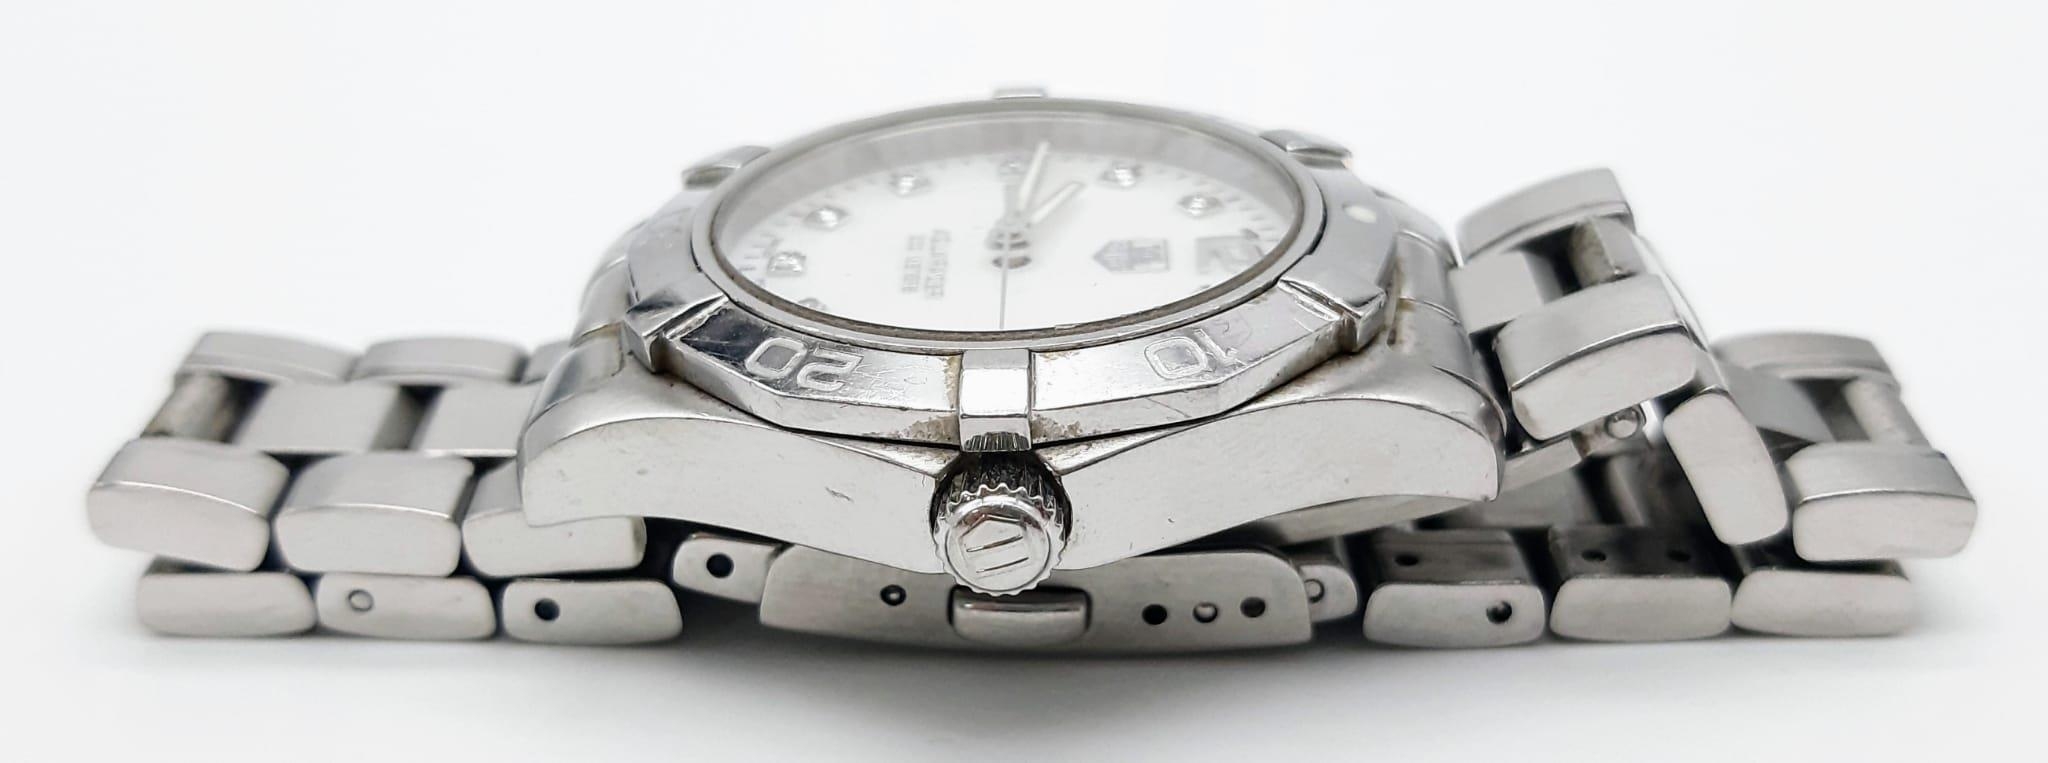 A Tag Heuer Ladies Aquaracer Diamond Watch. Stainless steel strap and case - 33m. Mother of Pearl - Image 3 of 6